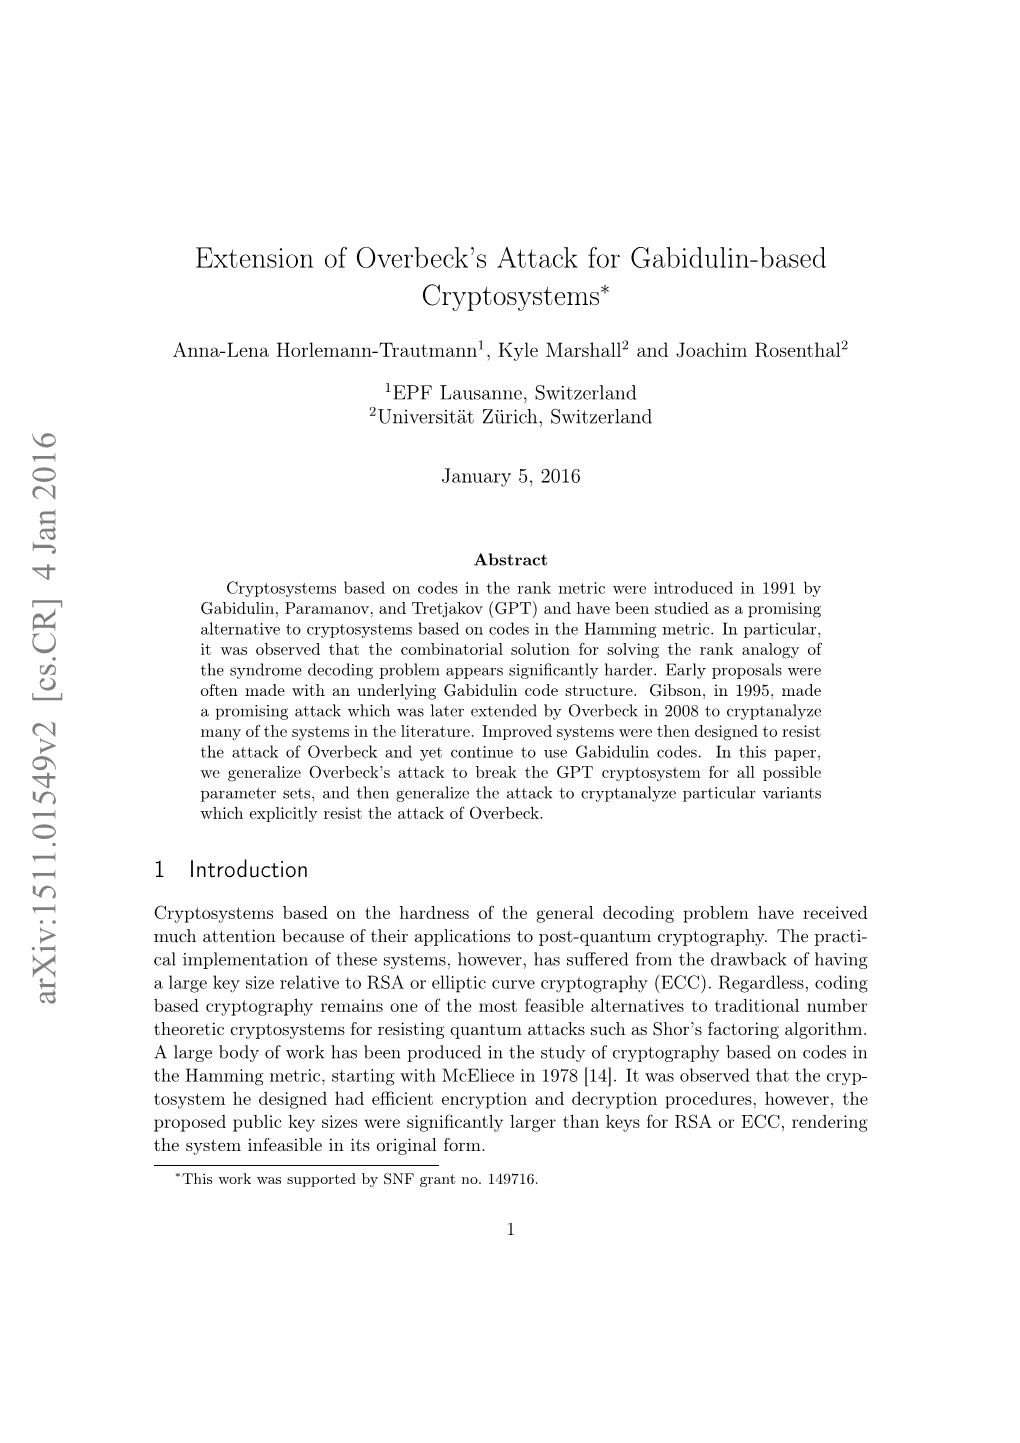 Extension of Overbeck's Attack for Gabidulin Based Cryptosystems